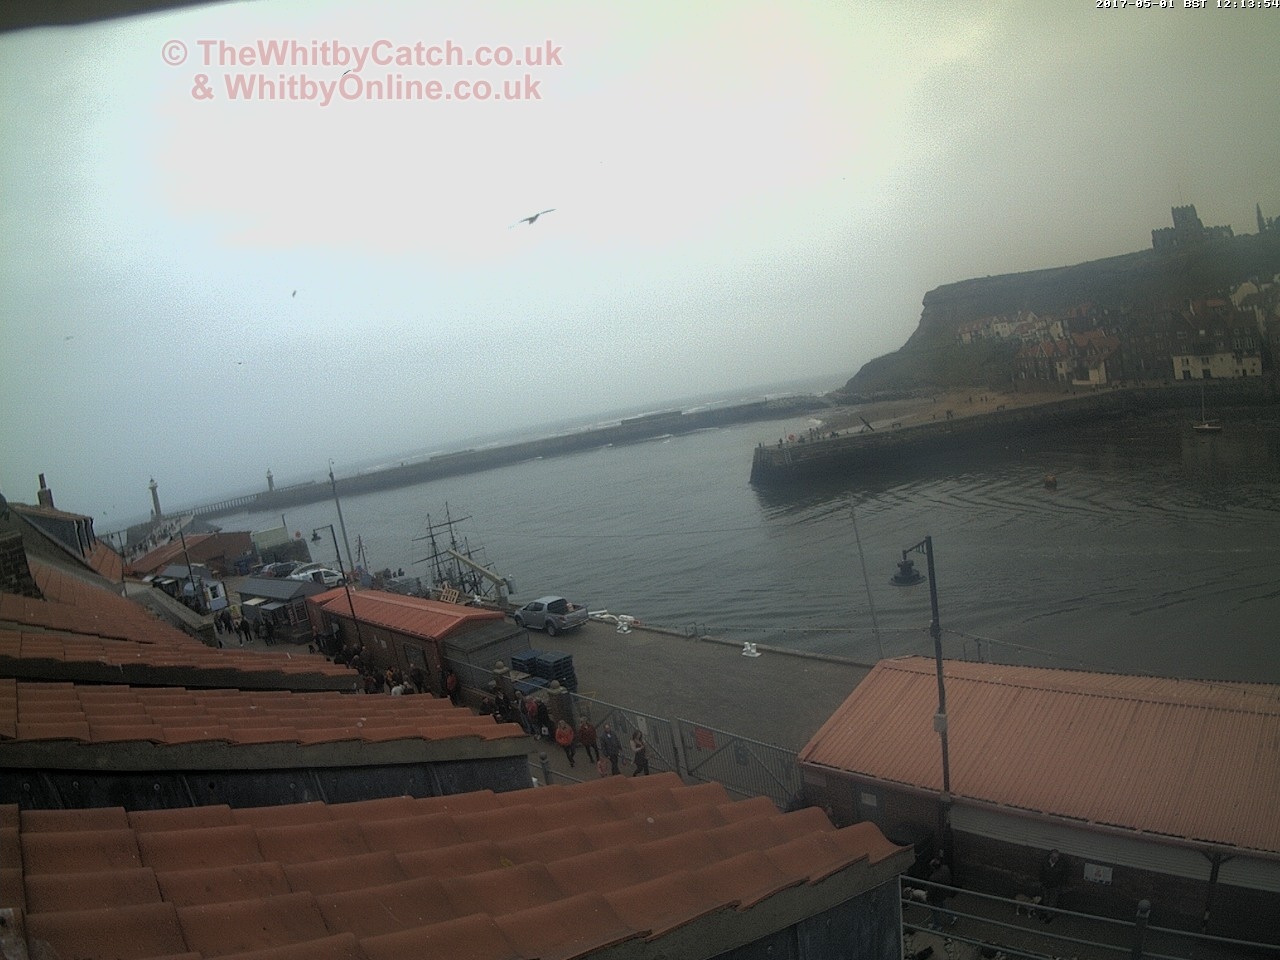 Whitby Mon 1st May 2017 12:14.